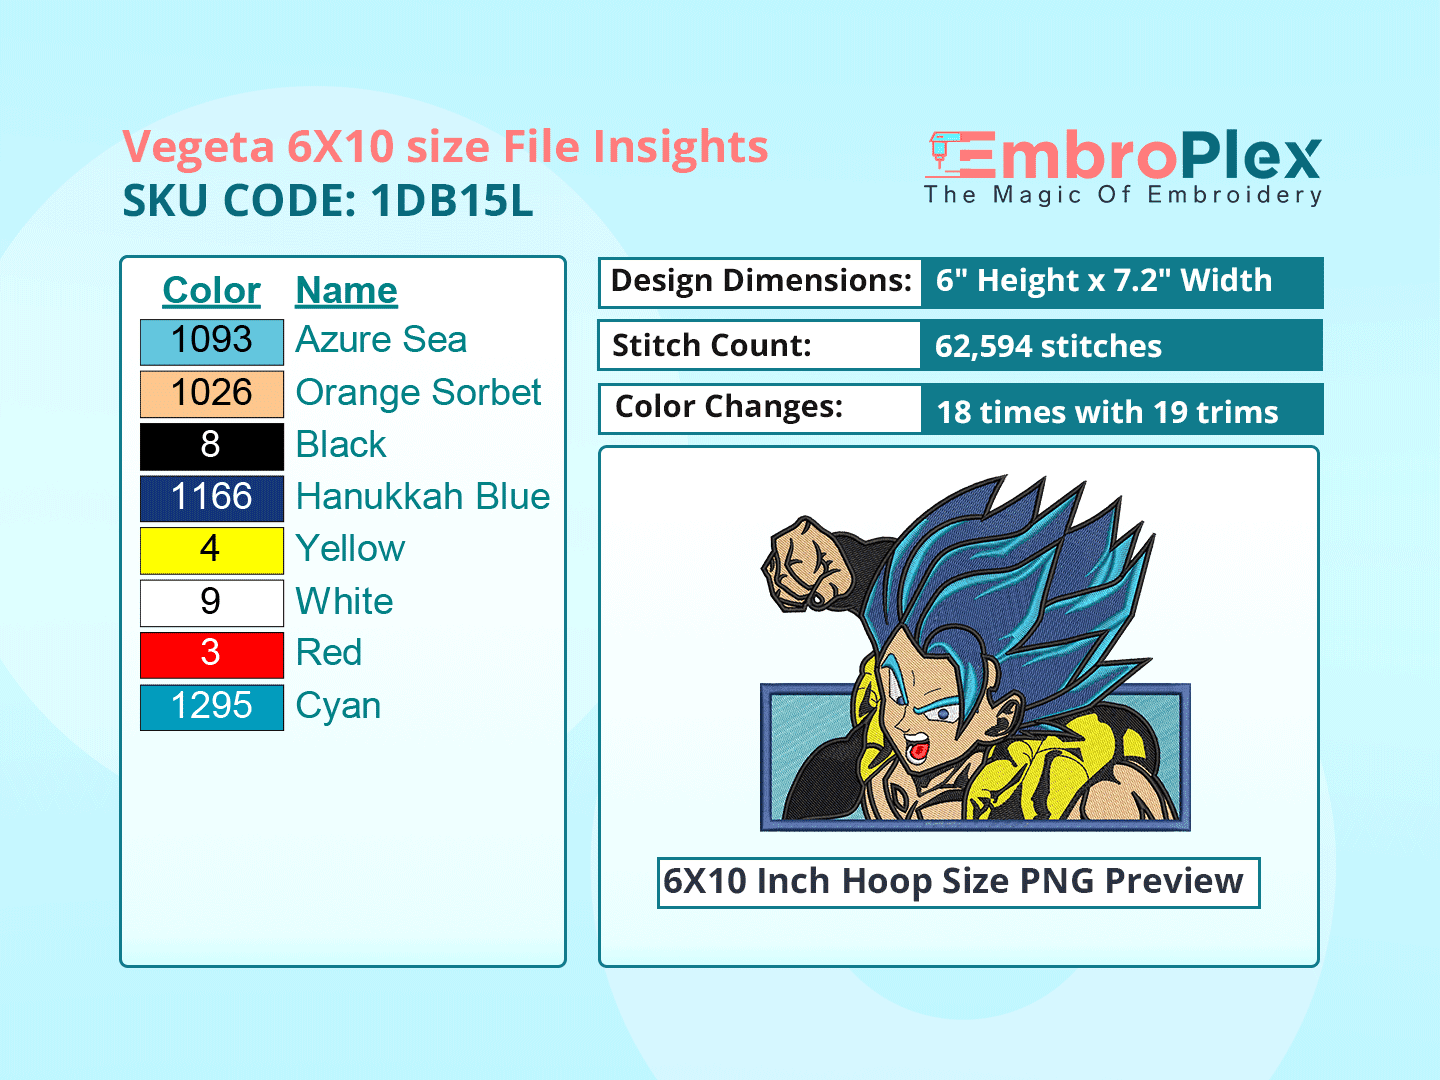  Anime-Inspired Vegeta Embroidery Design File - 6x10 Inch hoop Size Variation overview image